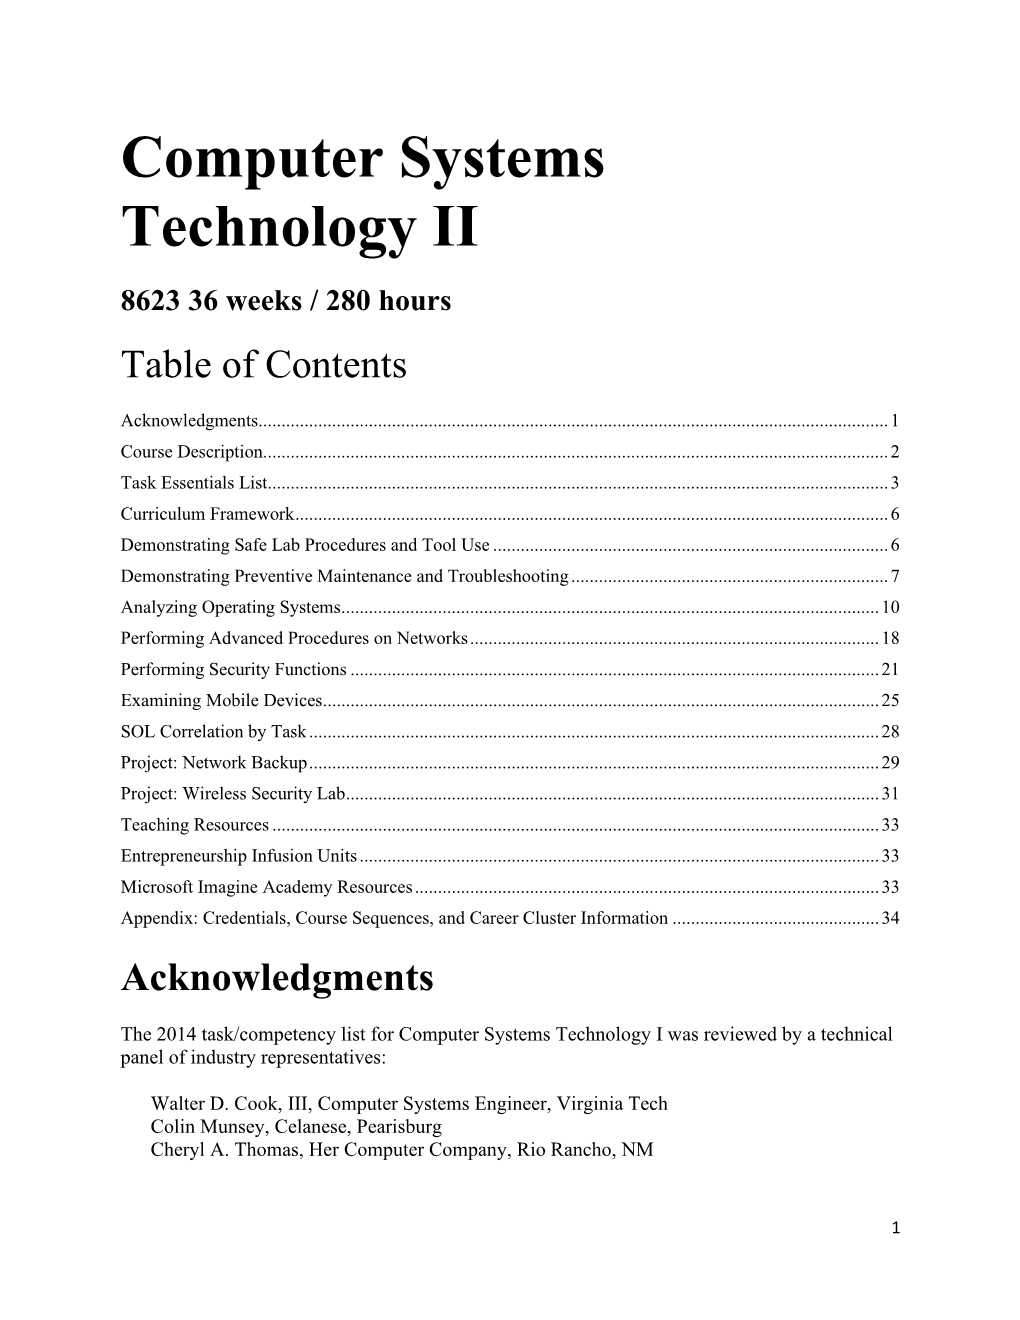 8623 Computer Systems Technology II